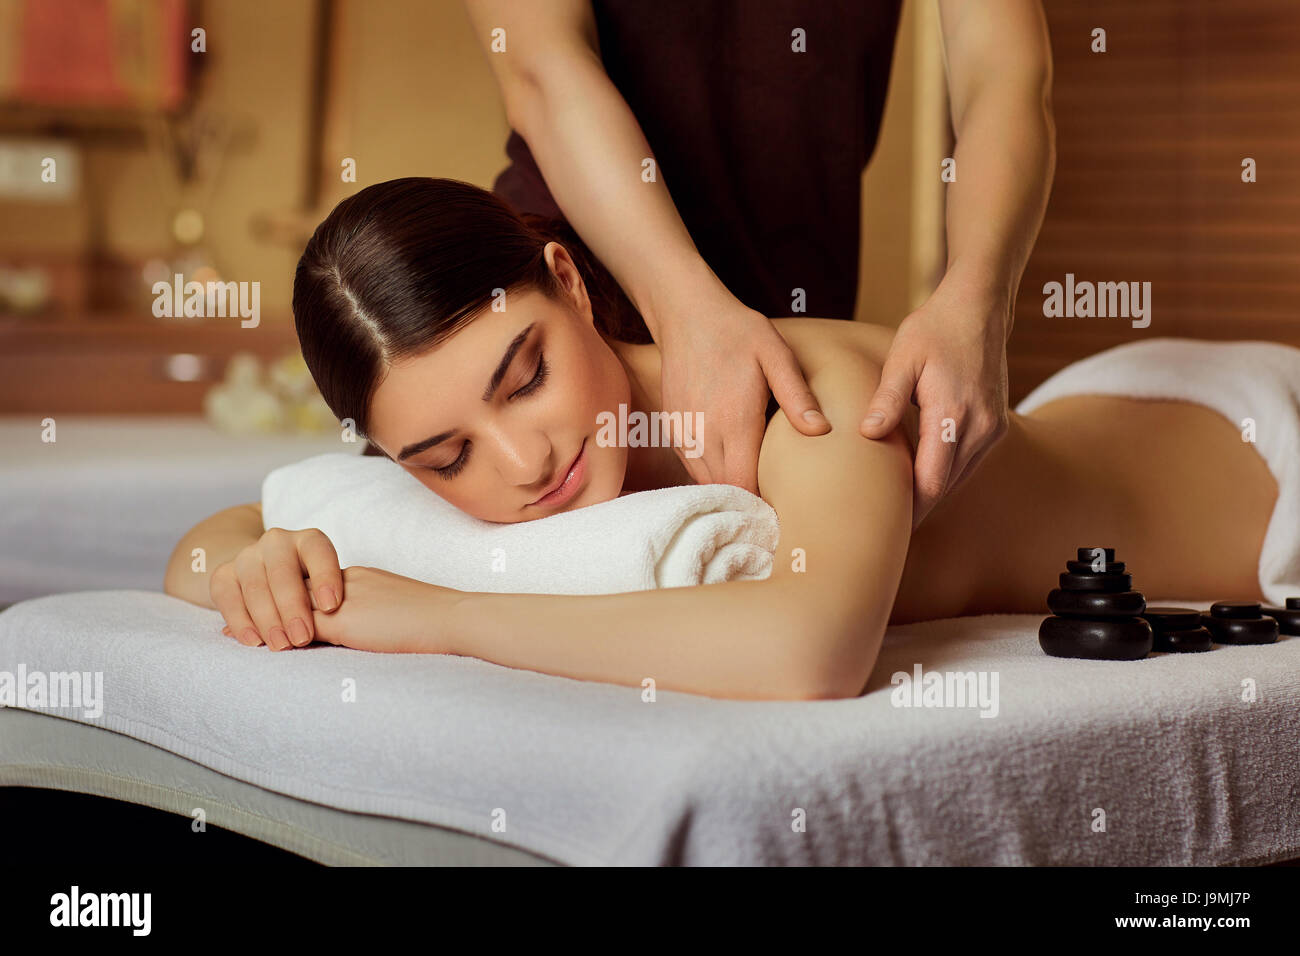 Young woman doing massage in spa salon. Stock Photo